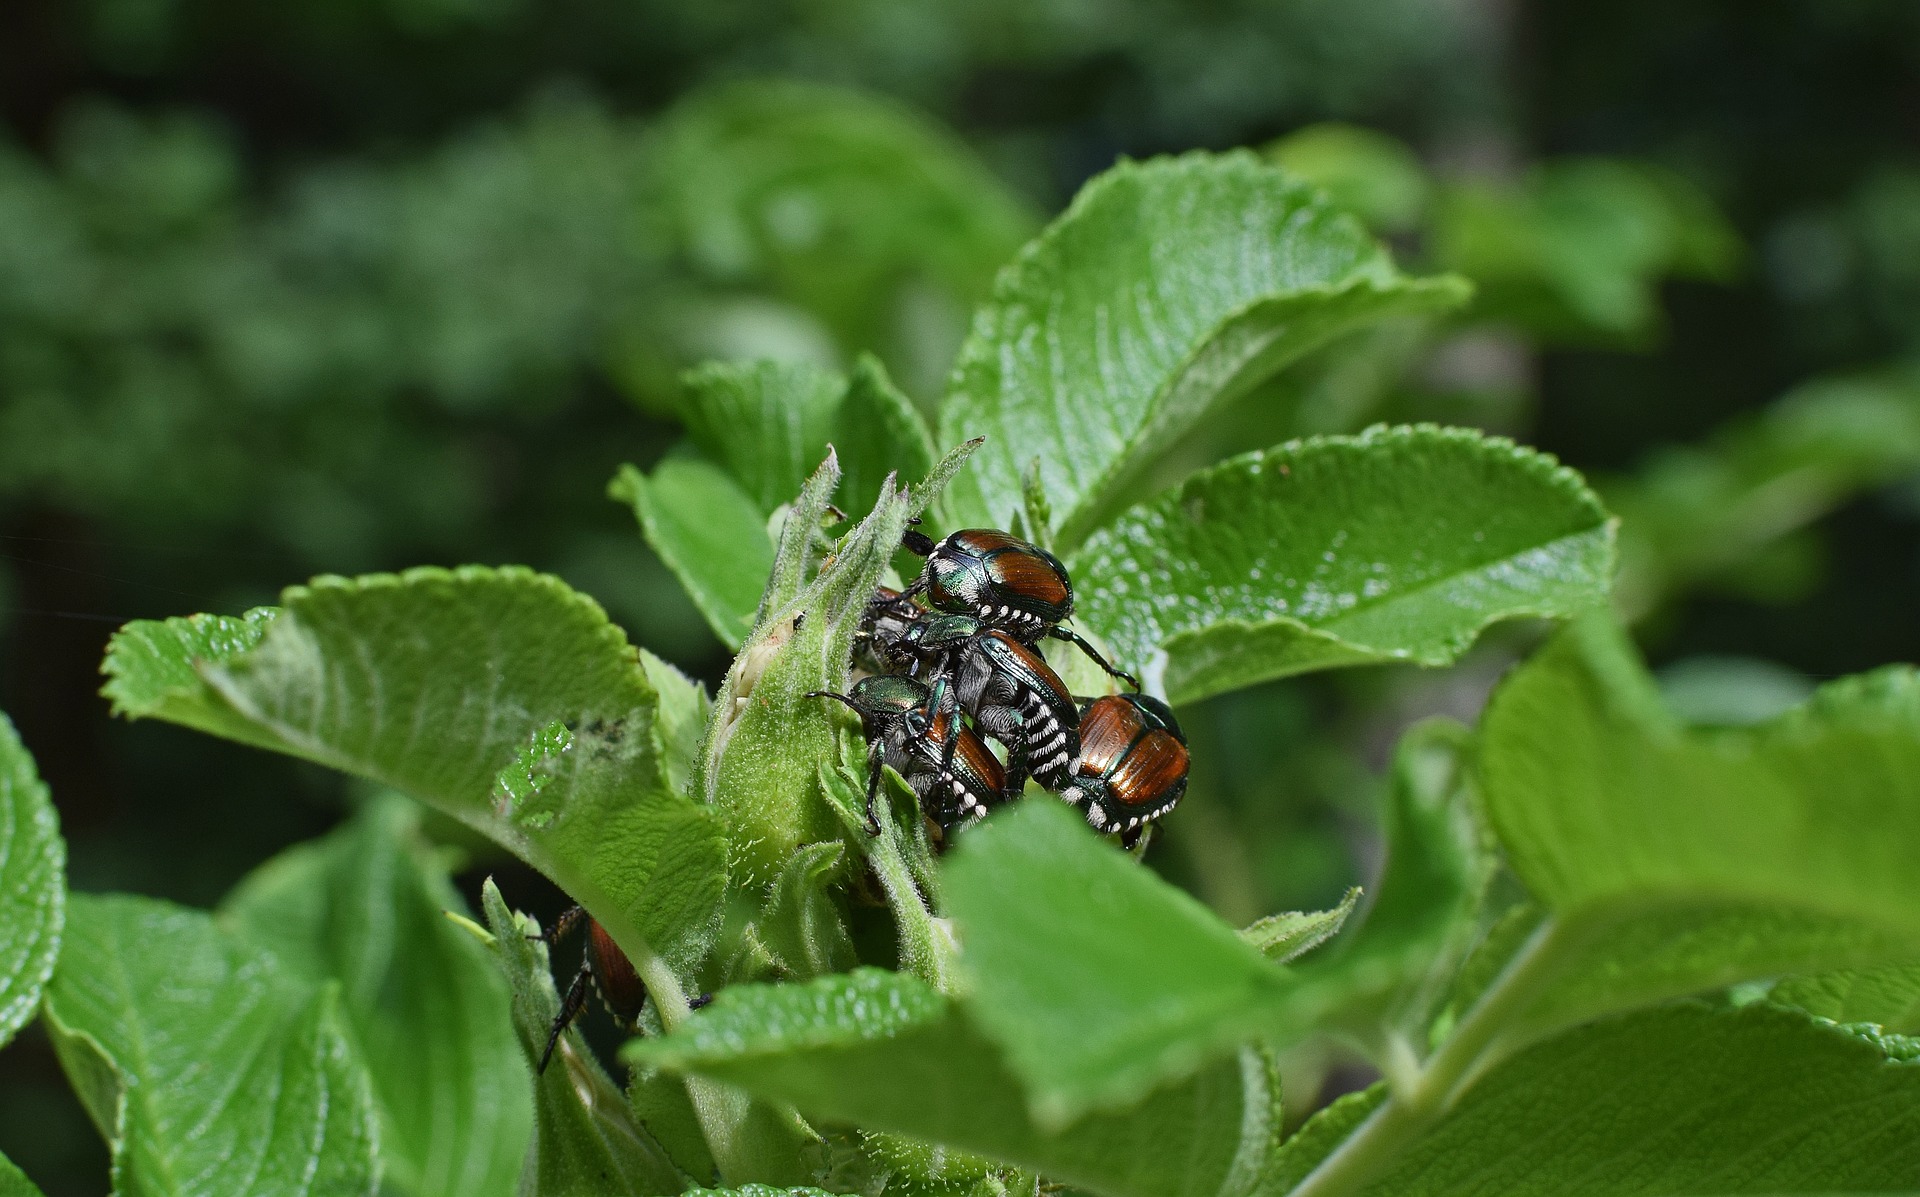 Milky Spore-Organic Control for Japanese Beetles